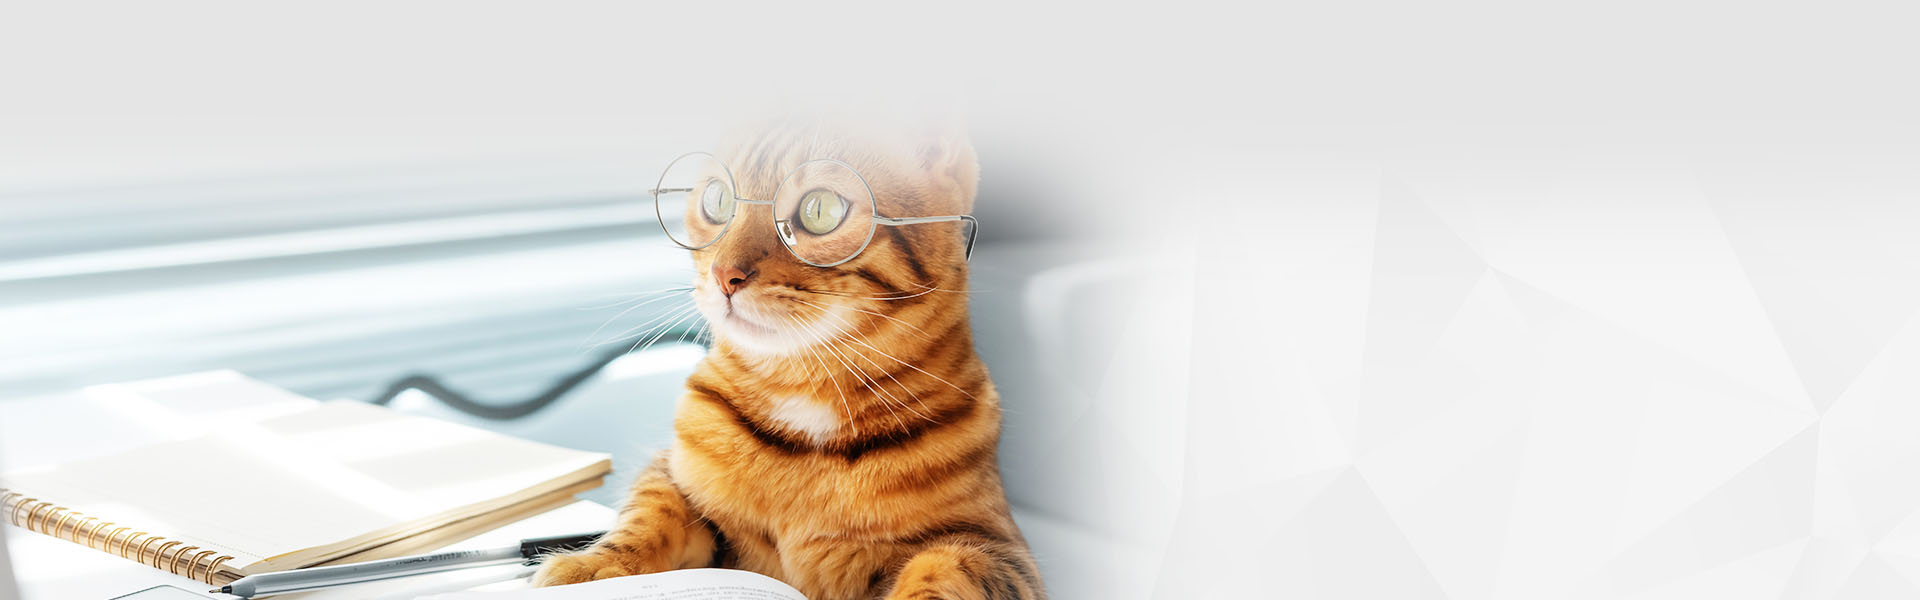 bengal cat with glasses and books